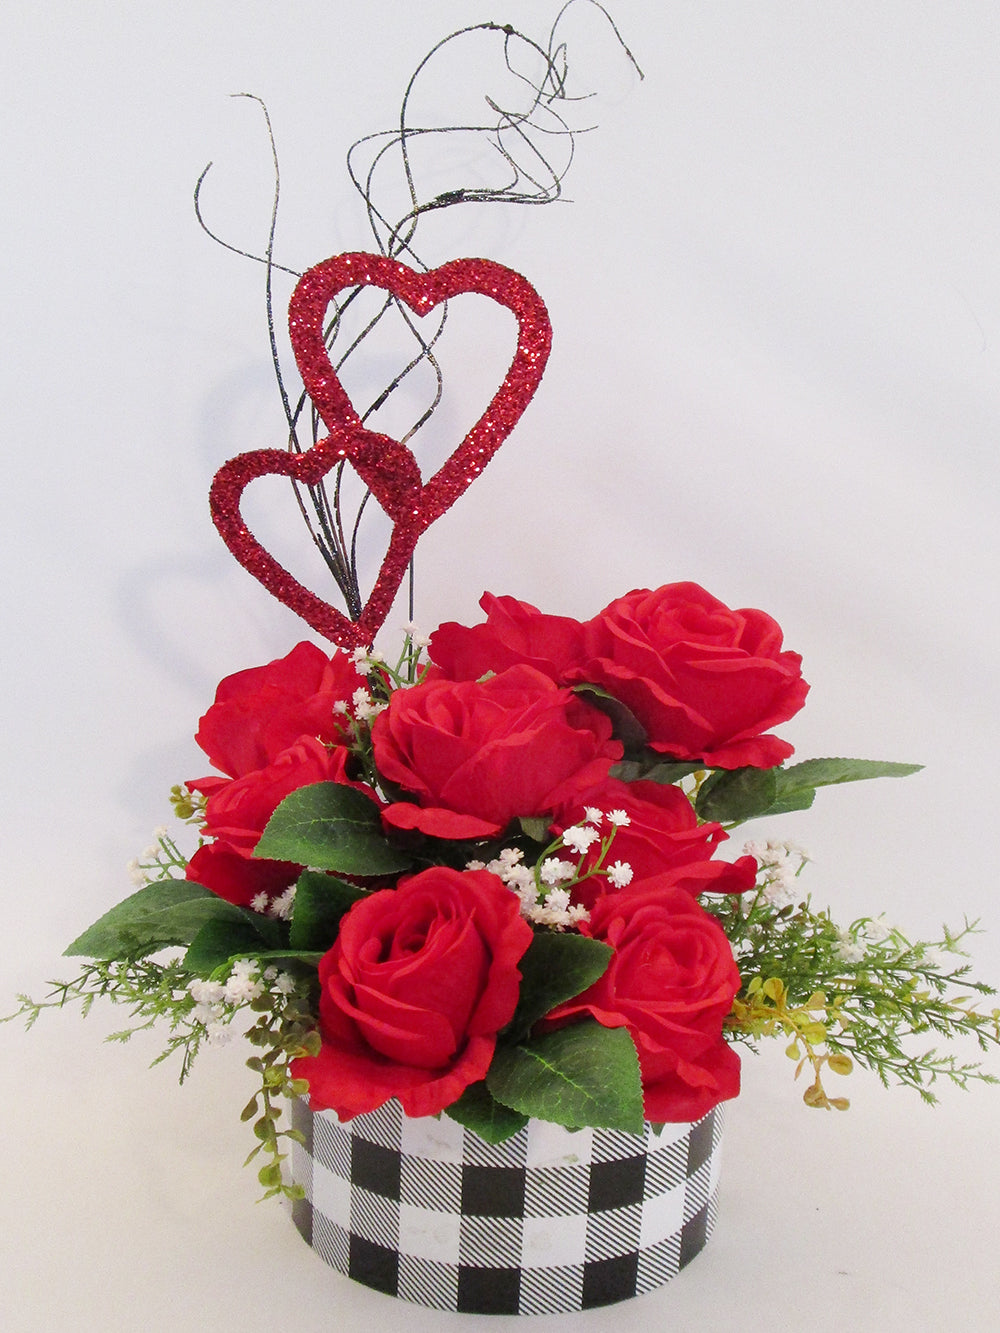 Red Rose and Hearts Floral Centerpiece